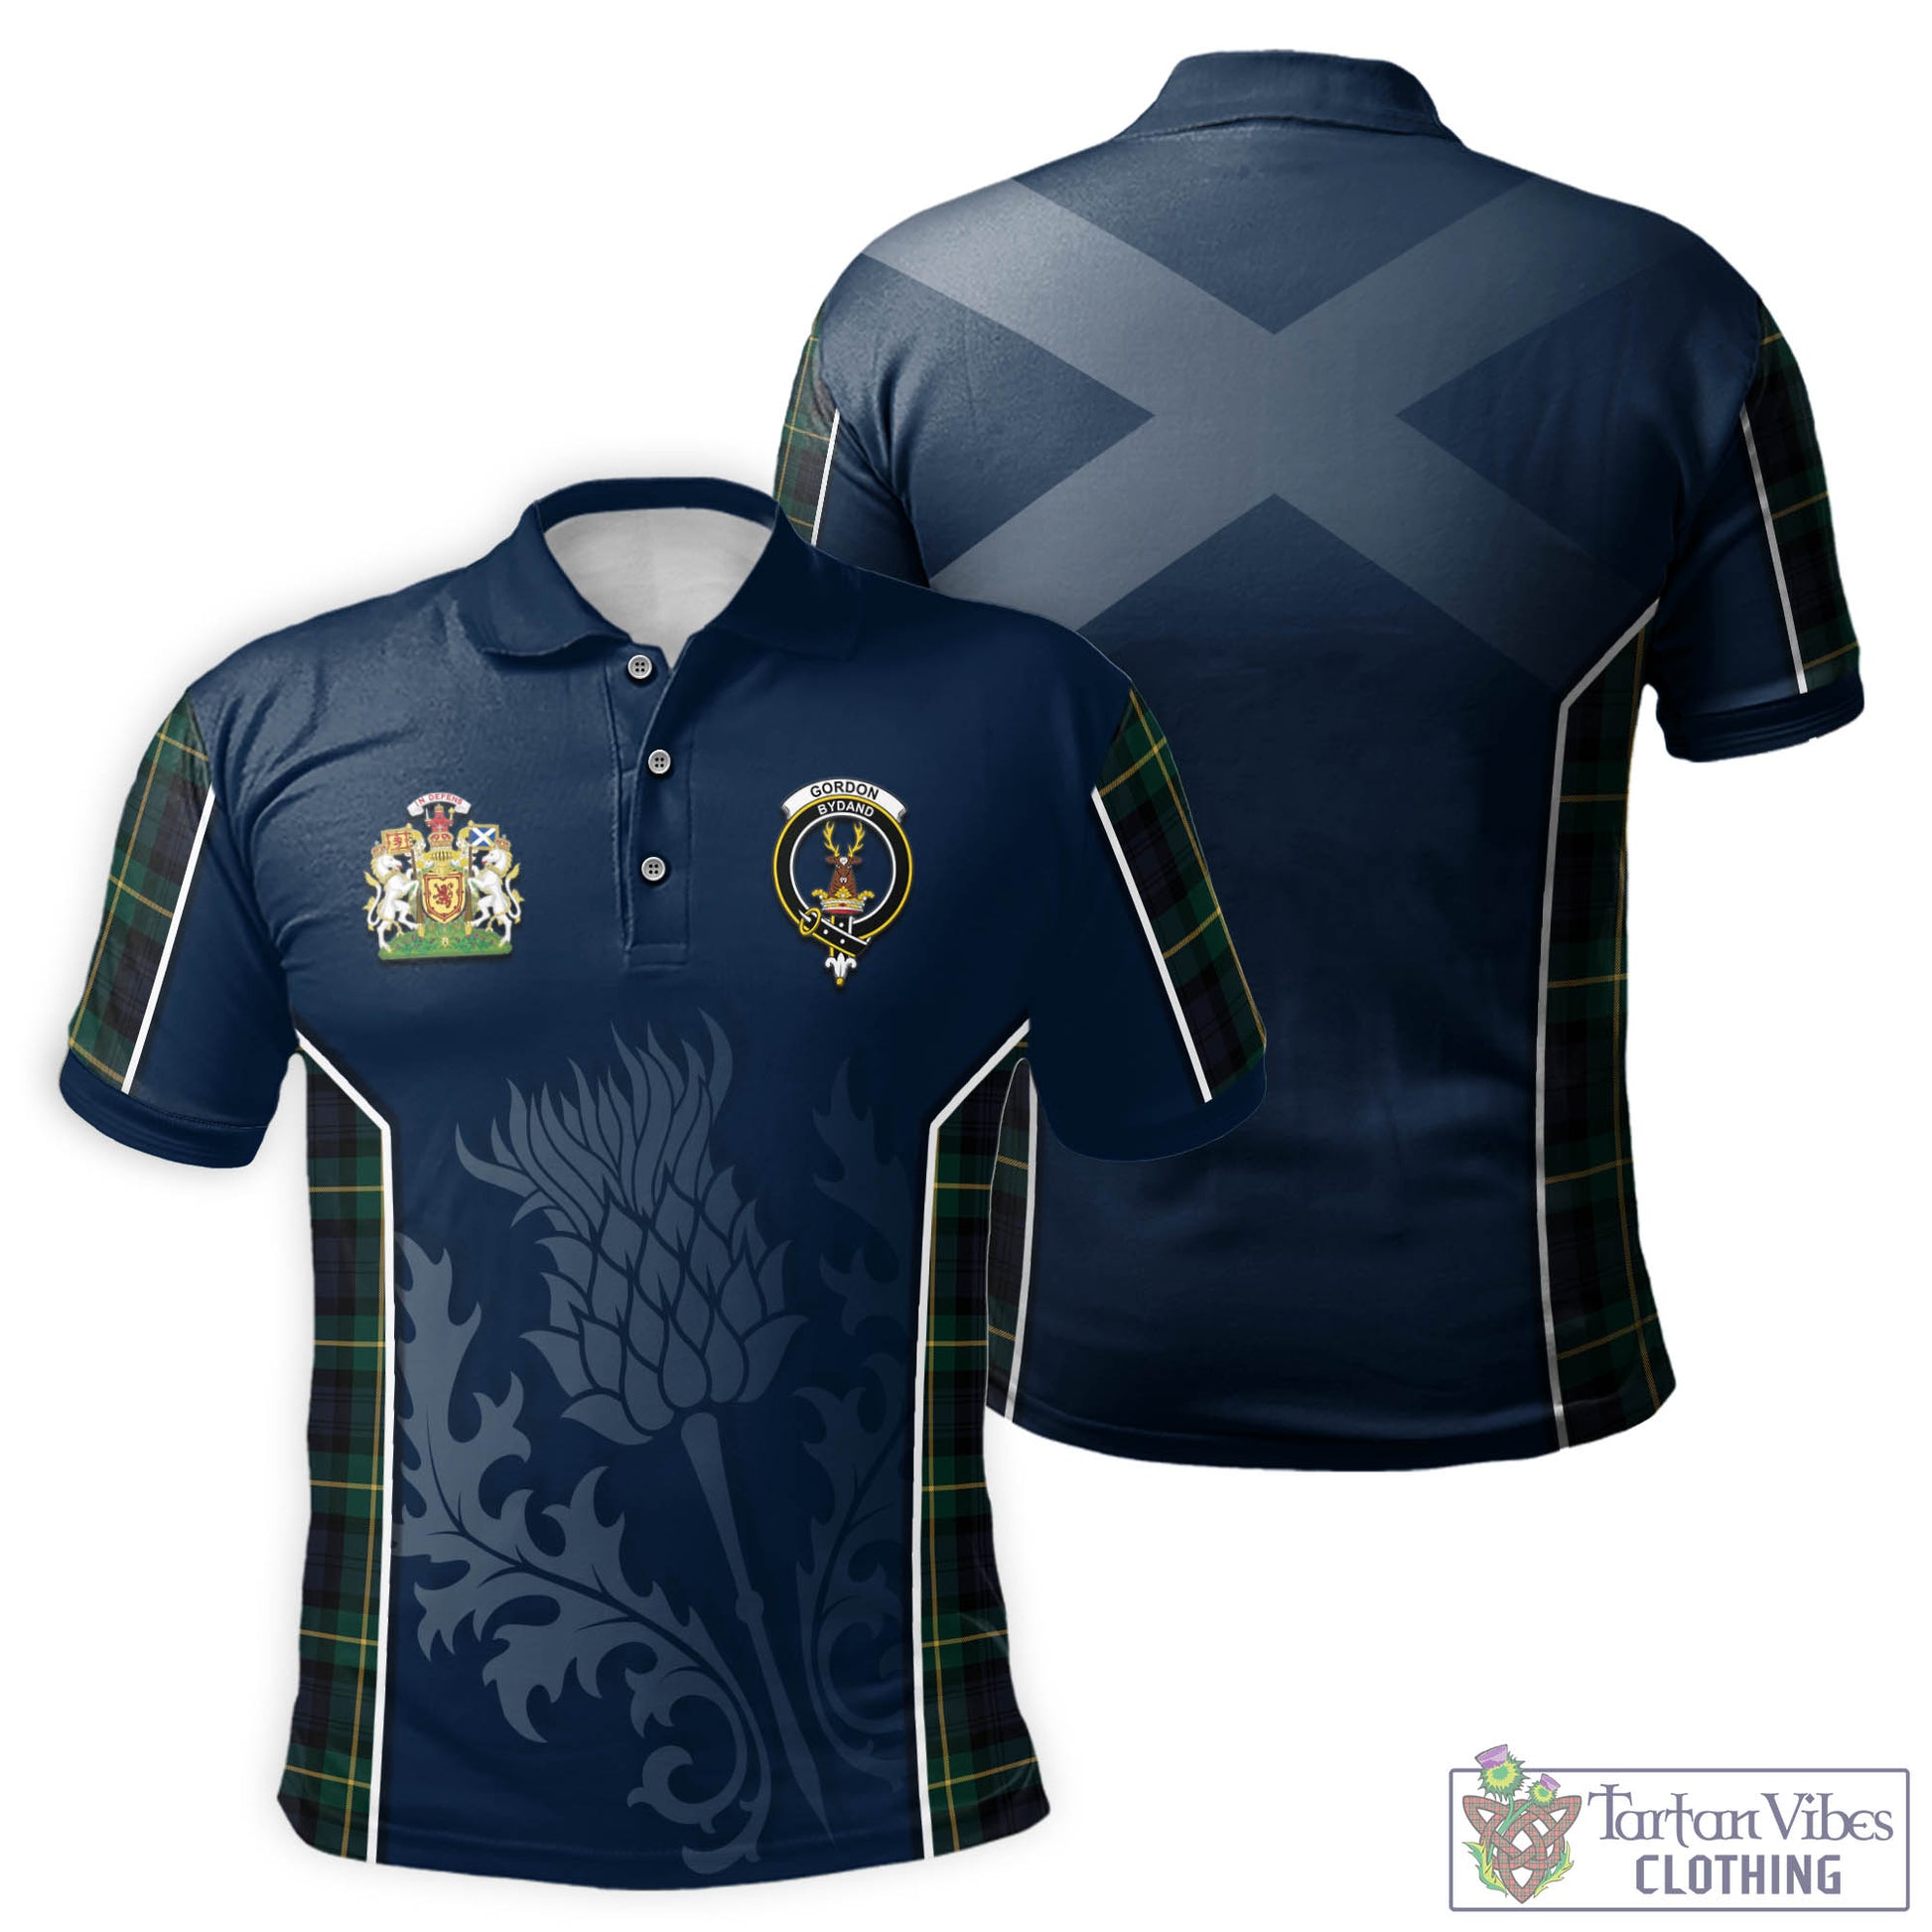 Tartan Vibes Clothing Gordon Old Tartan Men's Polo Shirt with Family Crest and Scottish Thistle Vibes Sport Style